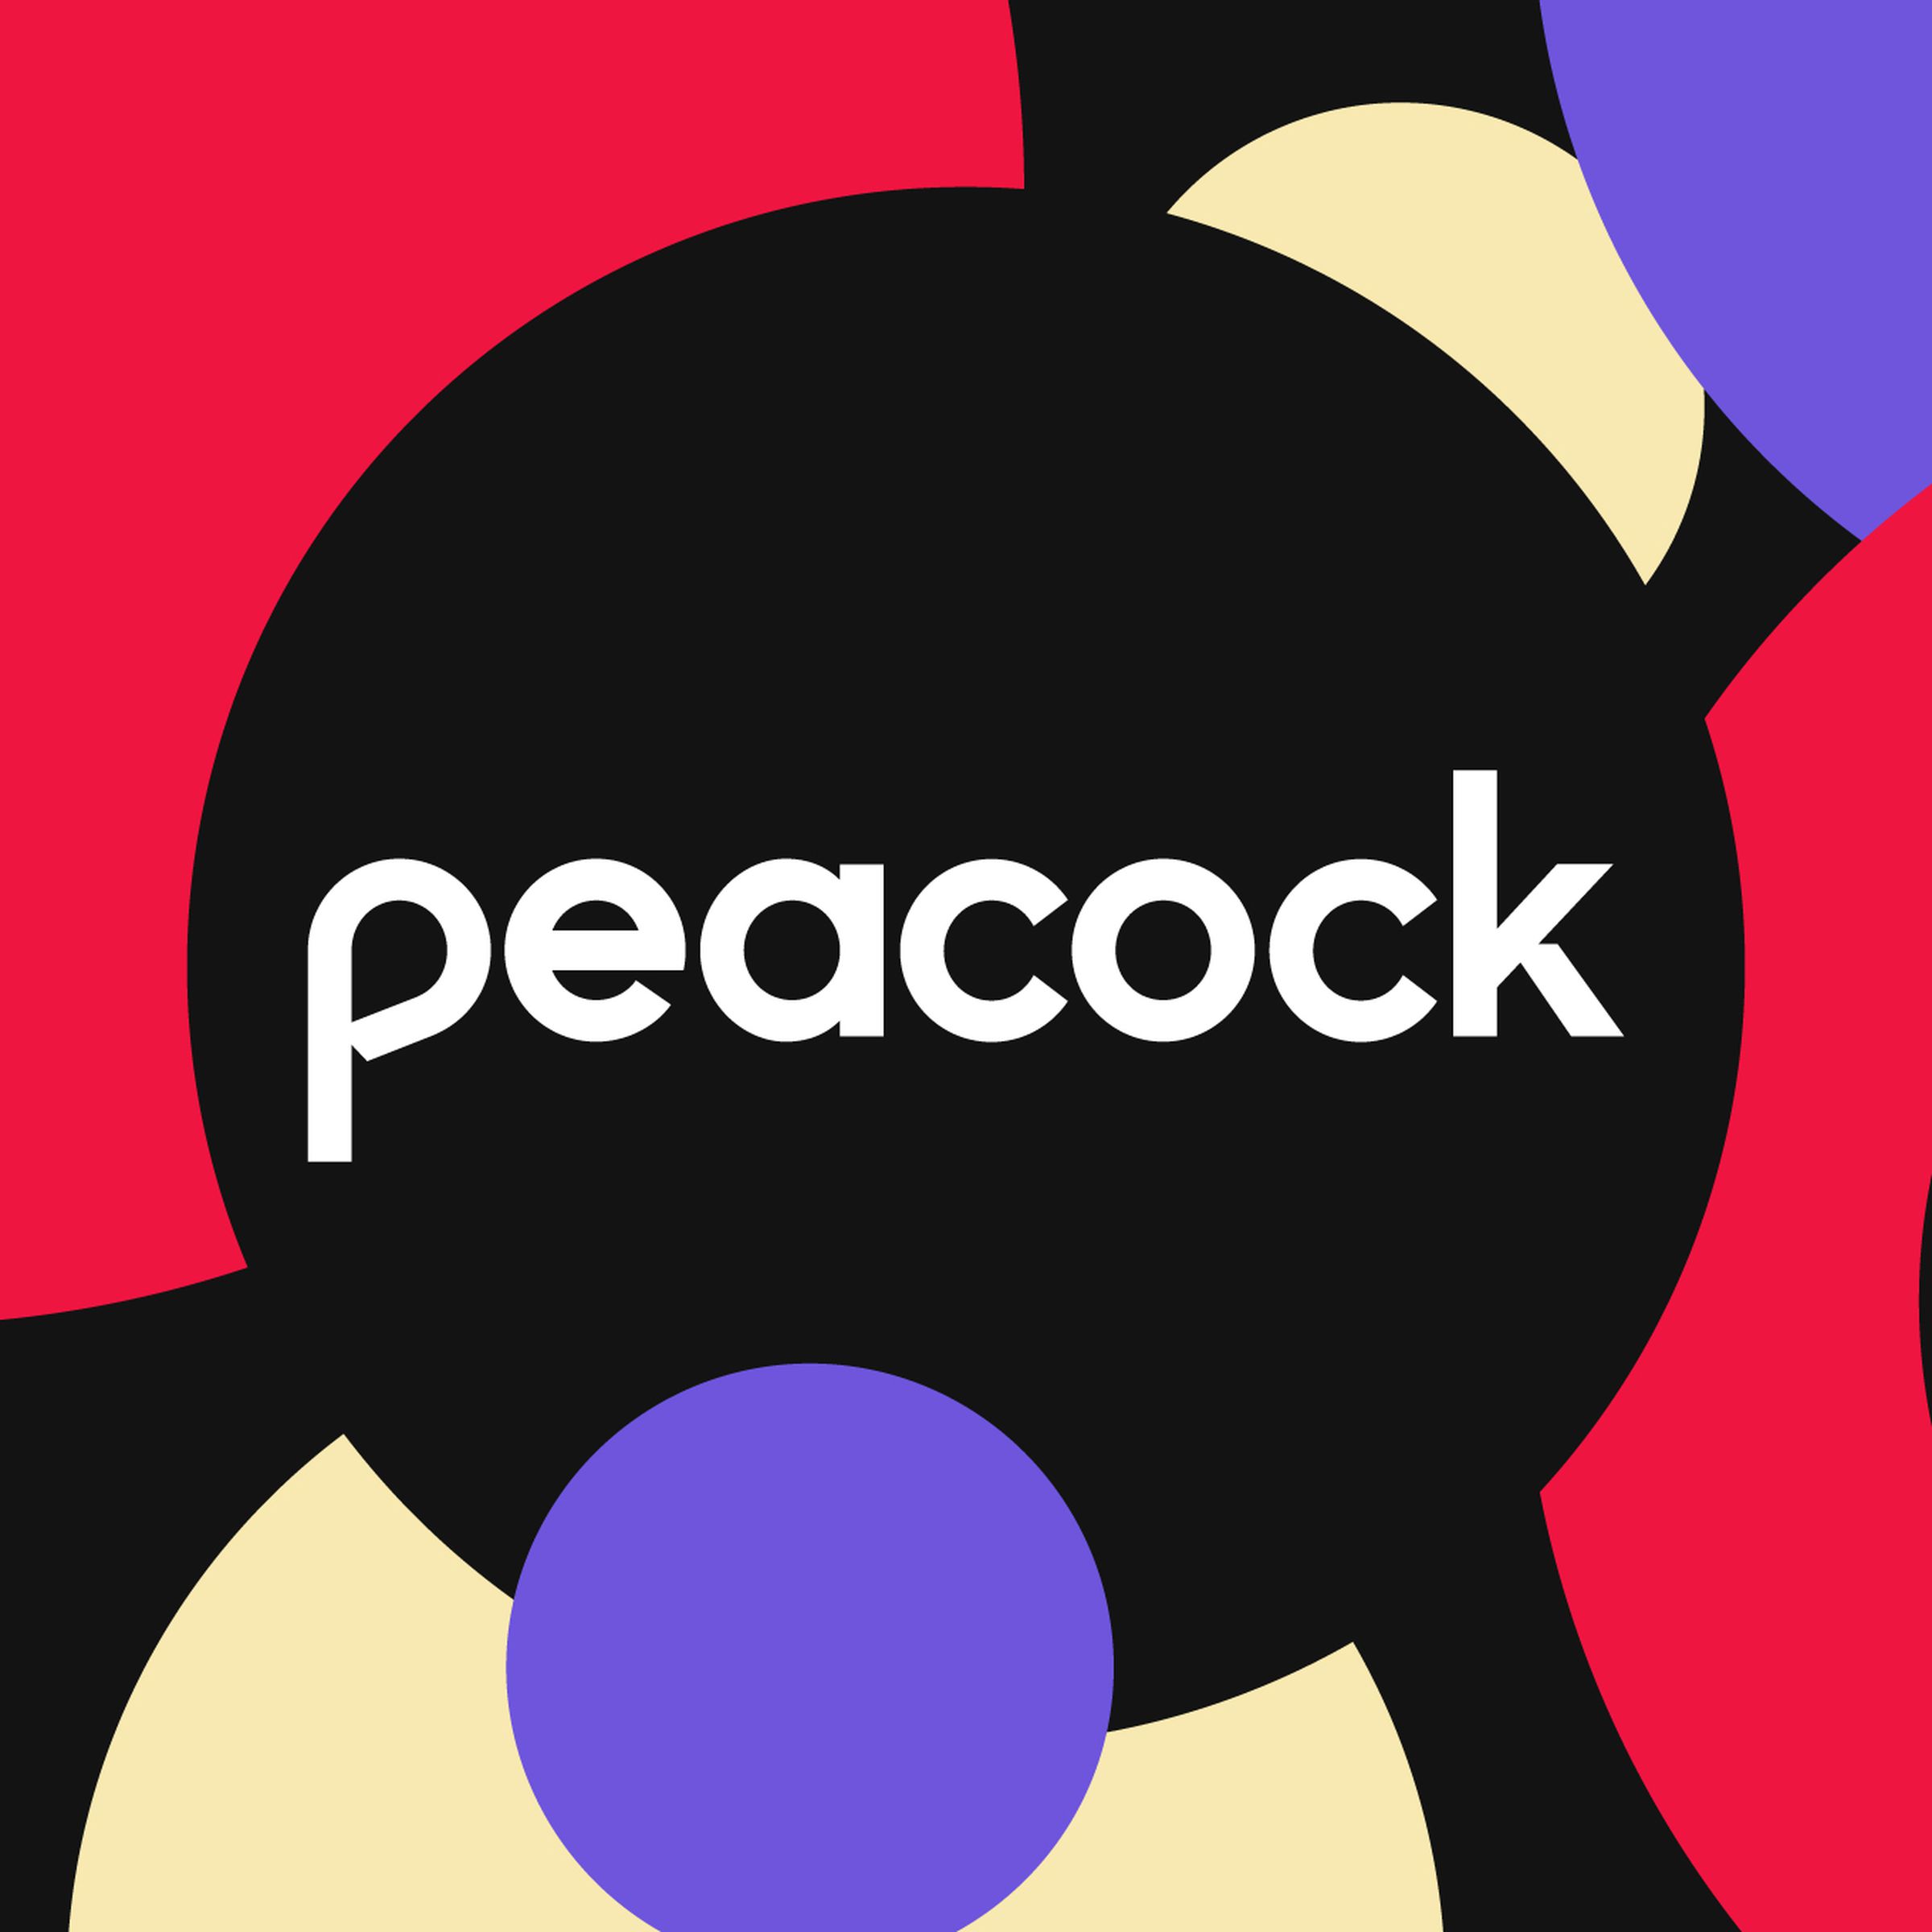 An illustration of the Peacock logo